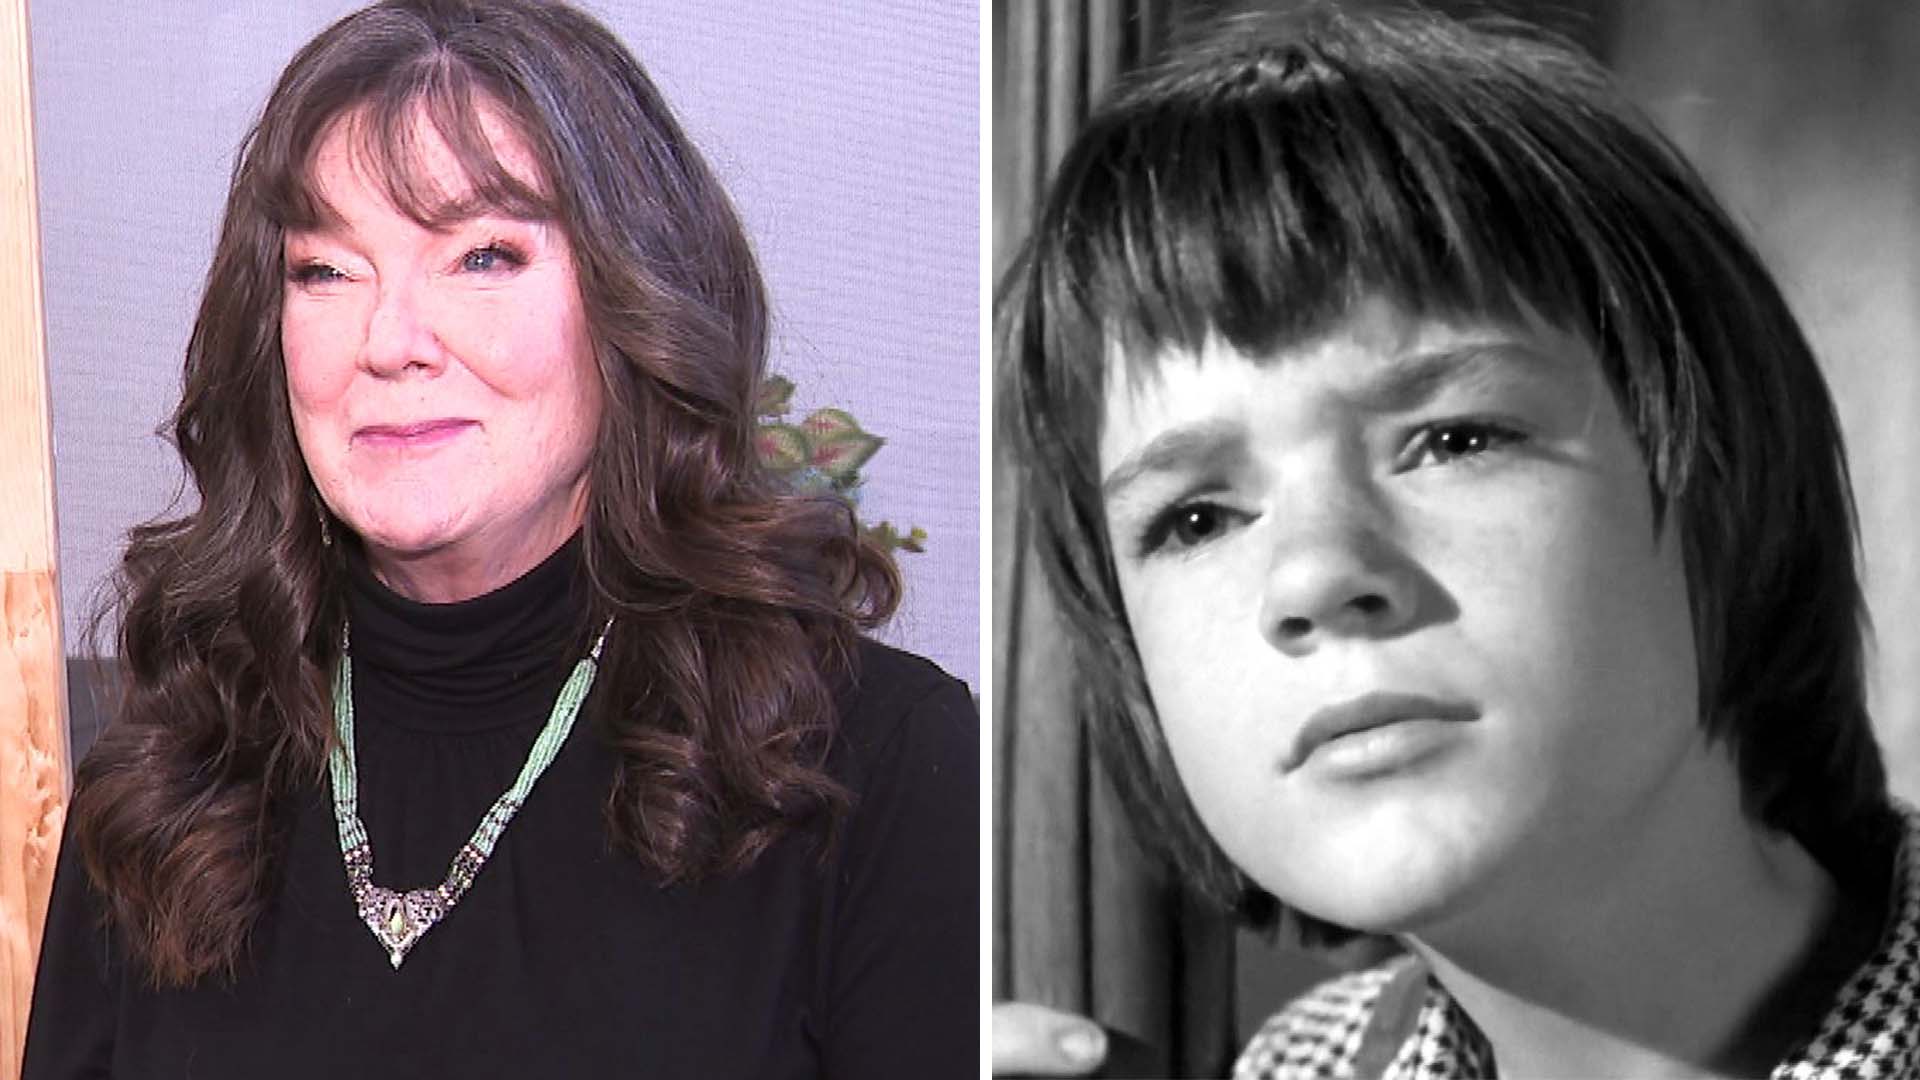 mary badham scout